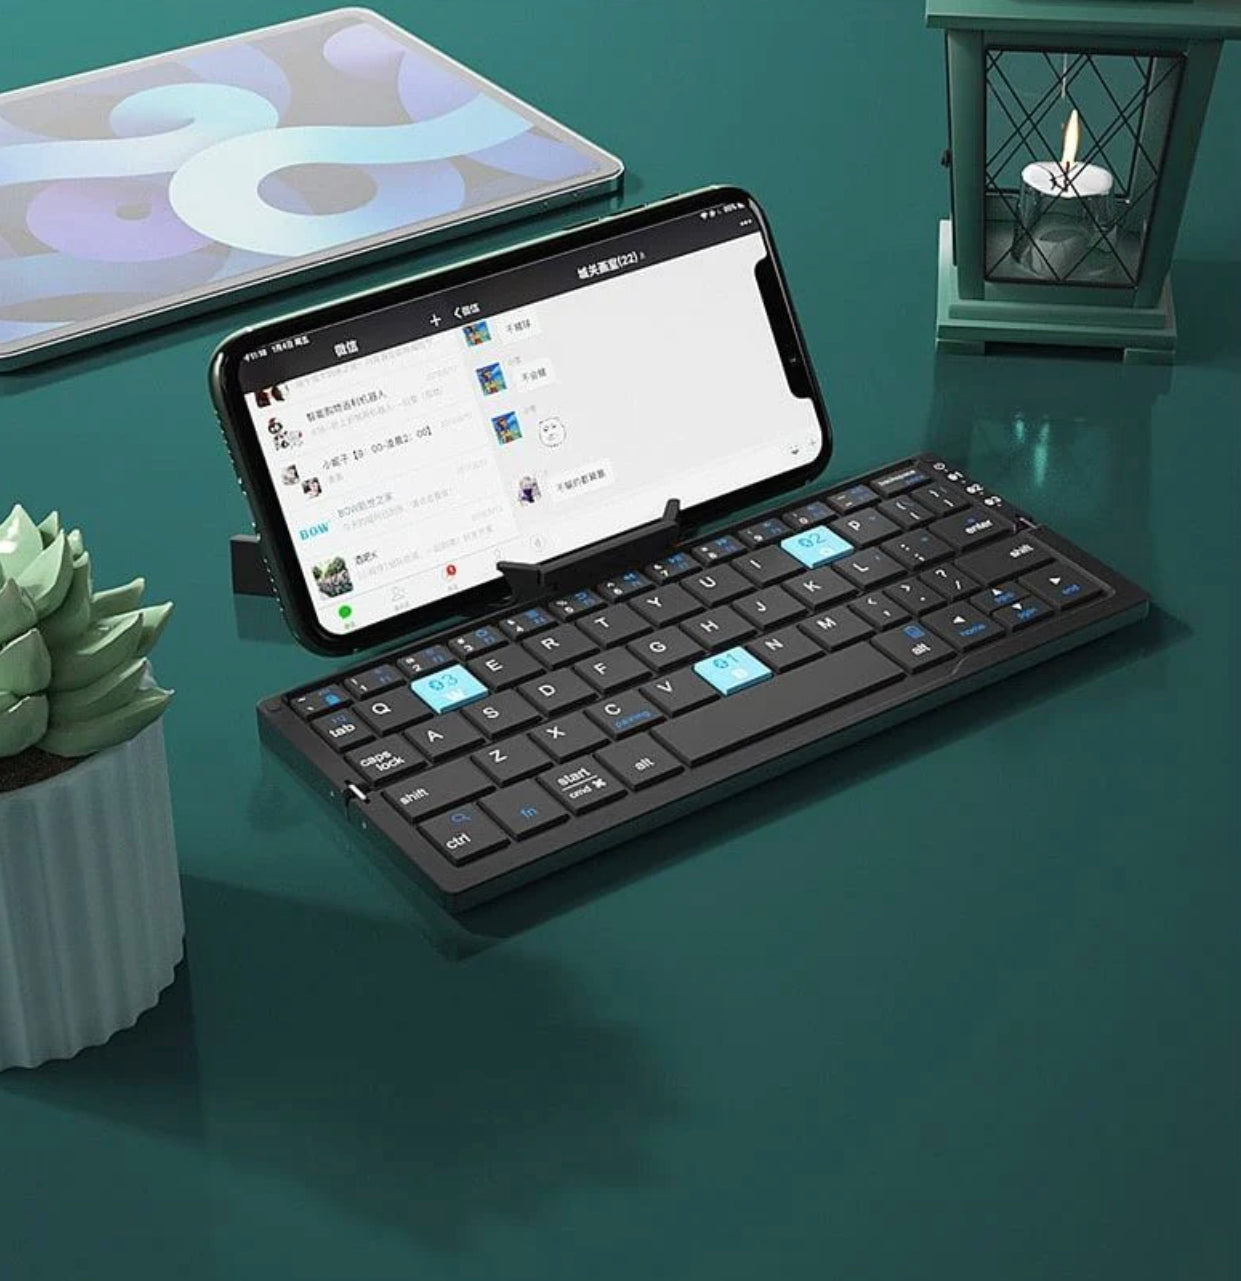 (ALMOST SOLD OUT) Premium Quality Mini Folding Bluetooth Keyboard + Stand + Charger + Travel Case [1 year warranty]- 🚨 86% OFF LAST DAY🚨